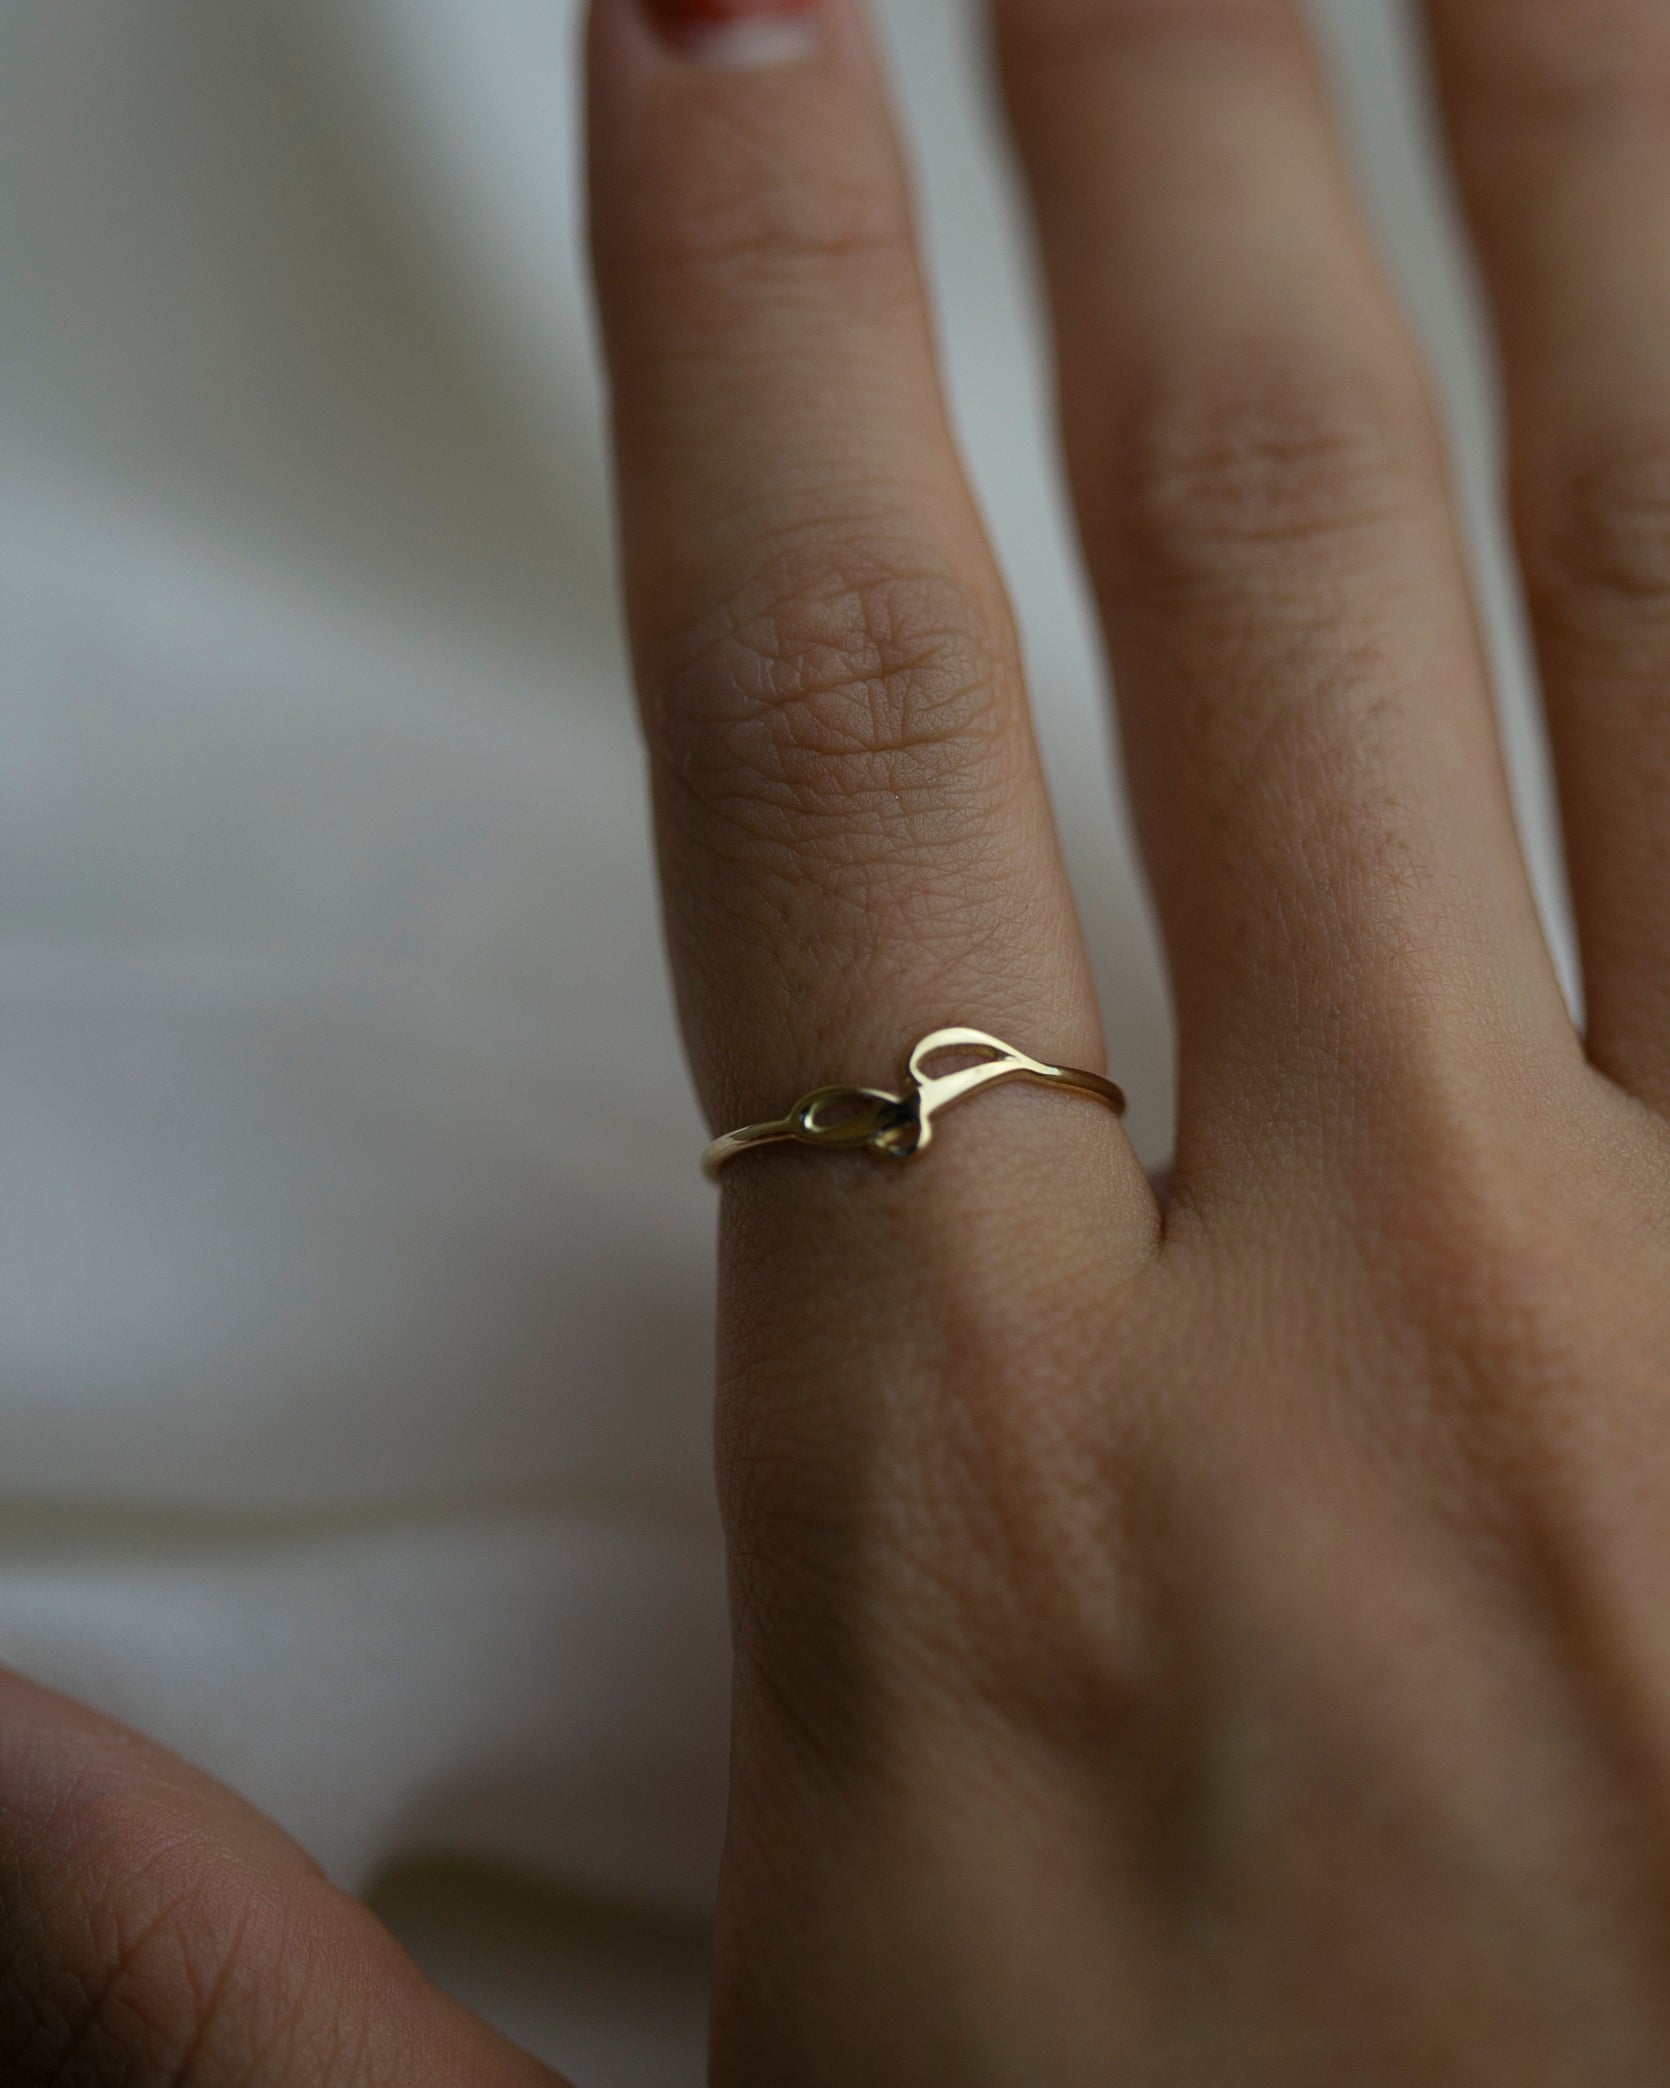 Buy Custom Gold Letter Ring, Gold Initial Ring, Personalized Gold Ring,  Minimalist Letter Ring, Simple Initial Ring, Dainty Letter Ring Online in  India - Etsy